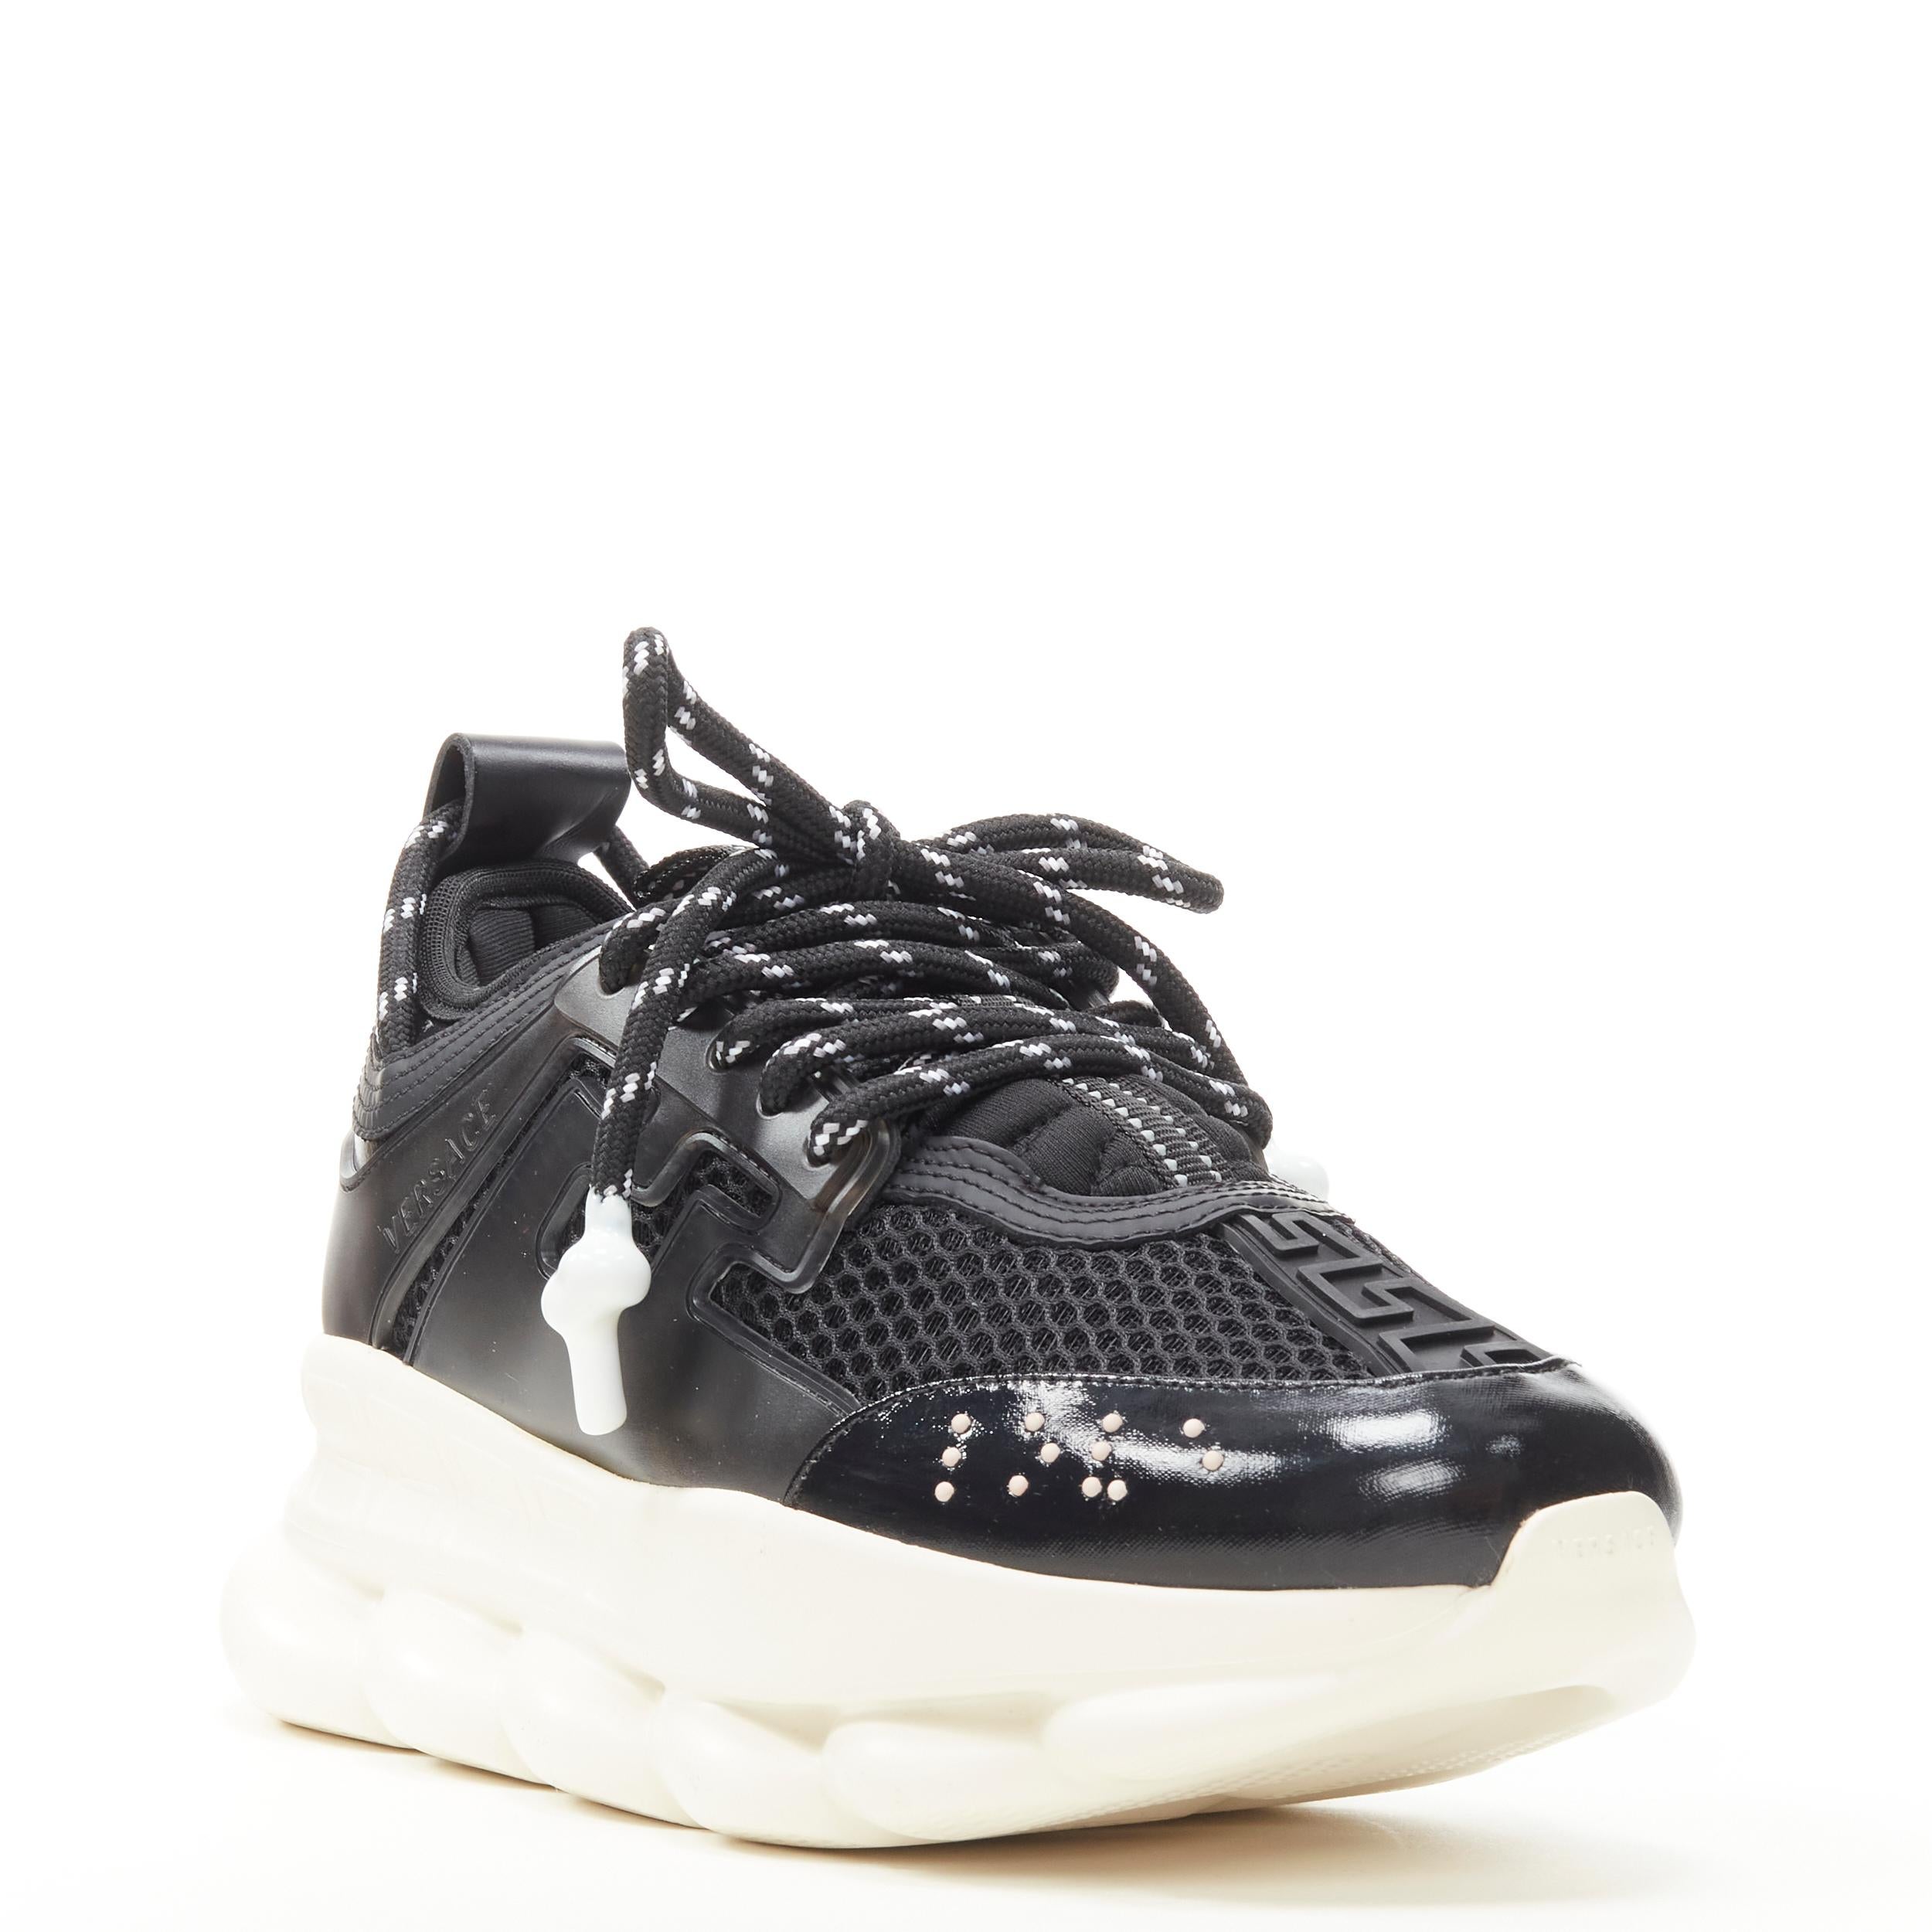 new VERSACE Chain Reaction nero black mesh chunky sneaker EU36 US6 
Reference: TGAS/C00111 
Brand: Versace 
Designer: Donatella Versace 
Model: Chain Reaction 
Material: Fabric 
Color: Black 
Pattern: Solid 
Closure: Lace 
Extra Detail: Signature